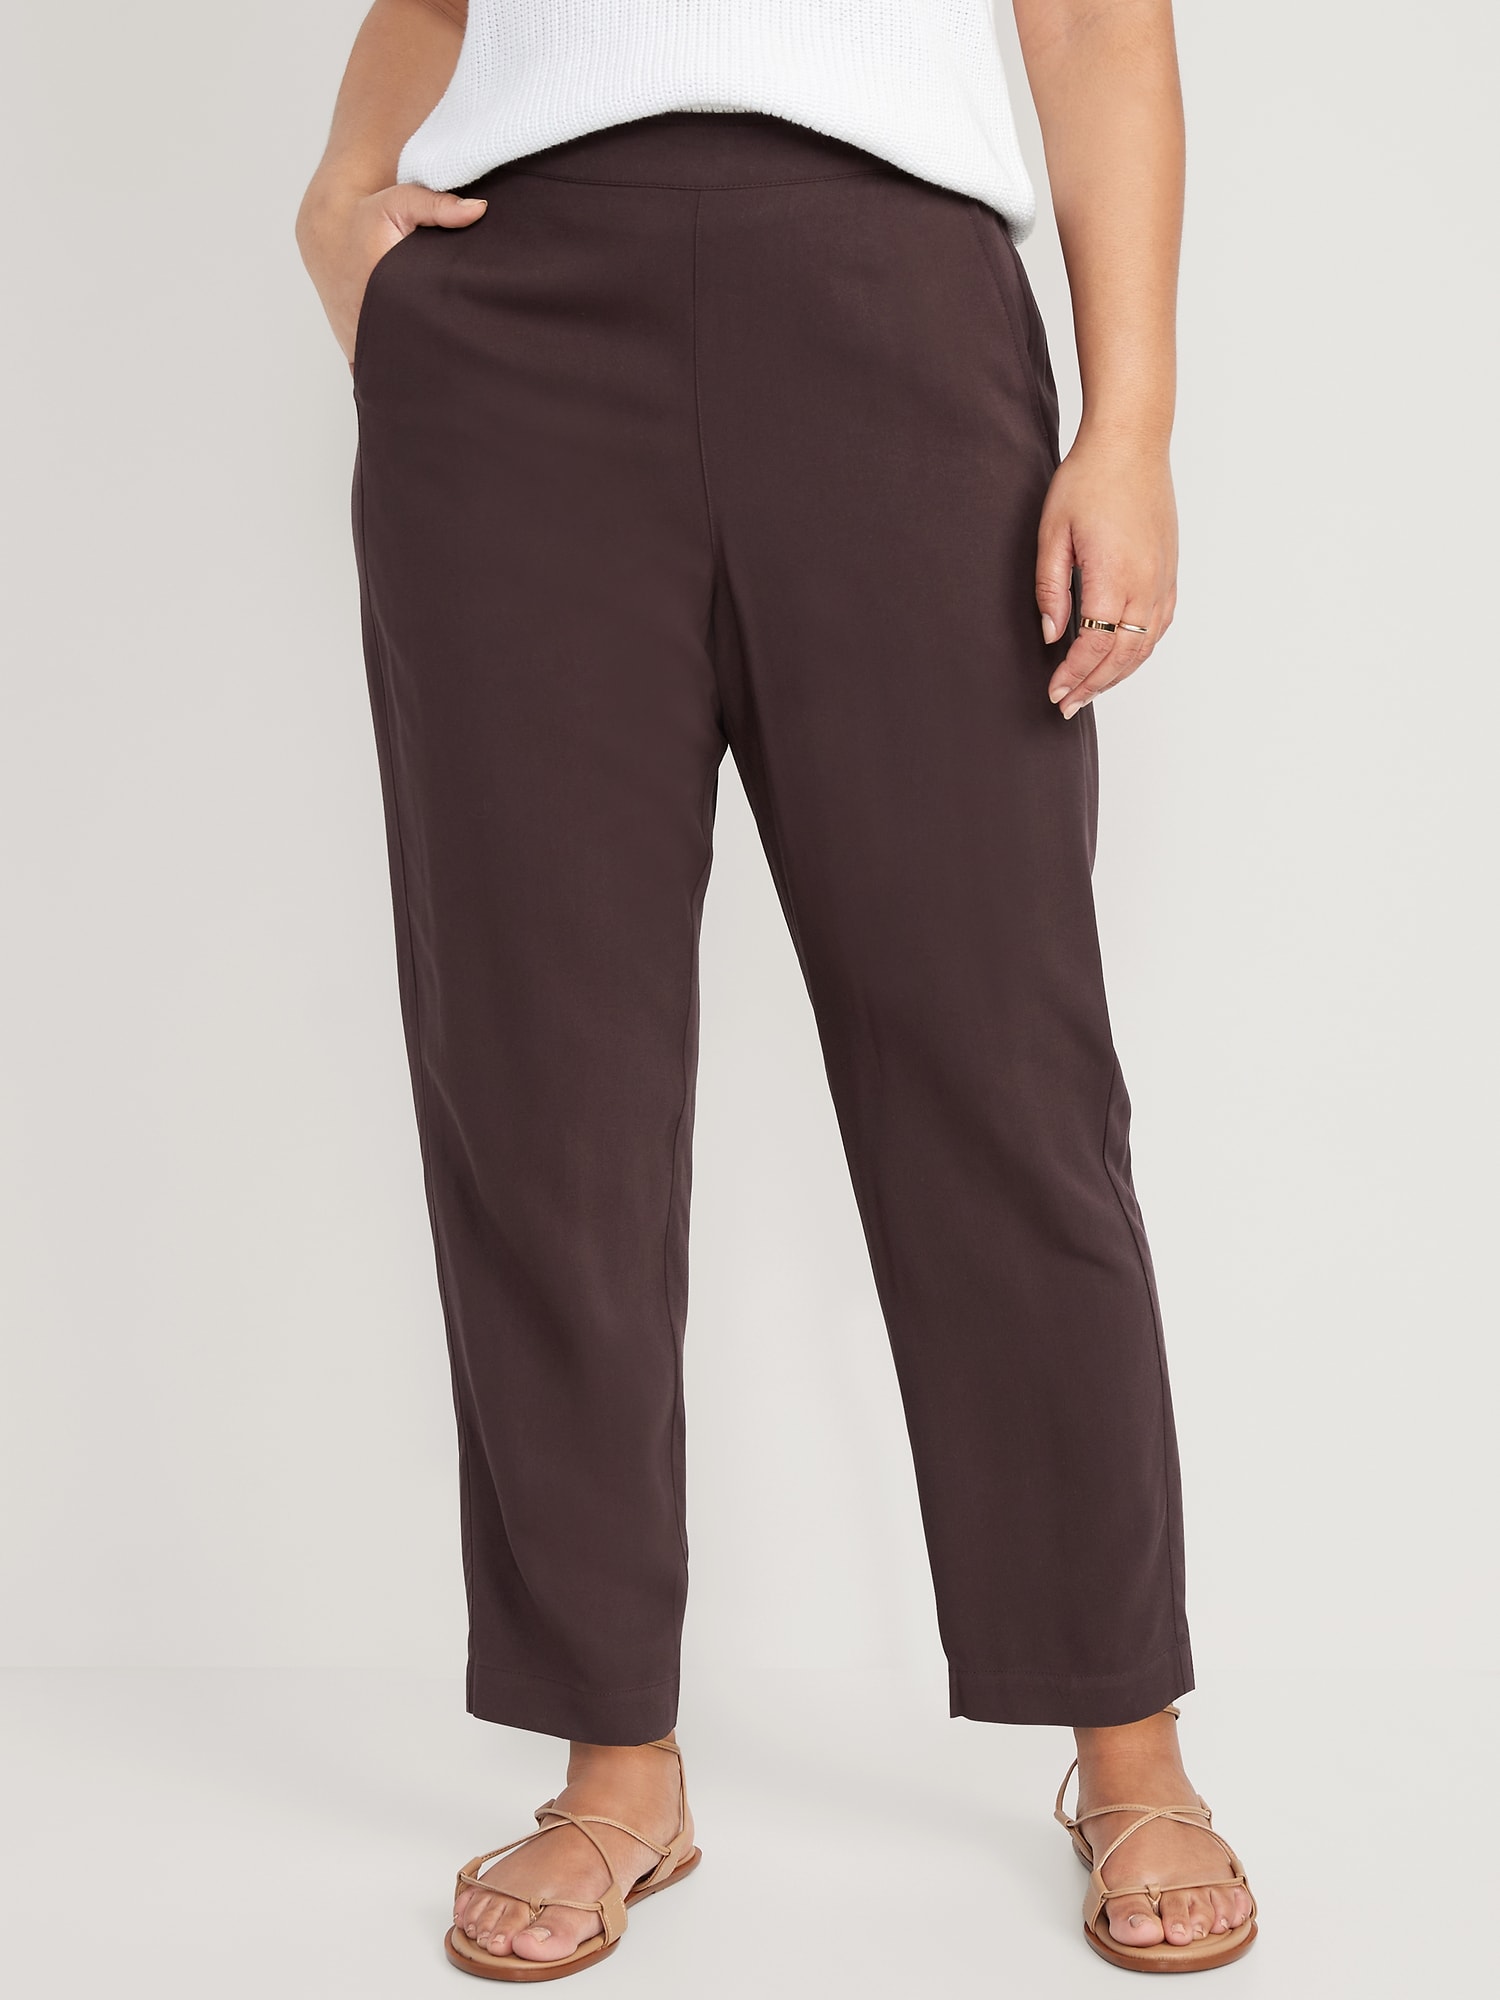 High-Waisted Playa Taper Pants for Women | Old Navy